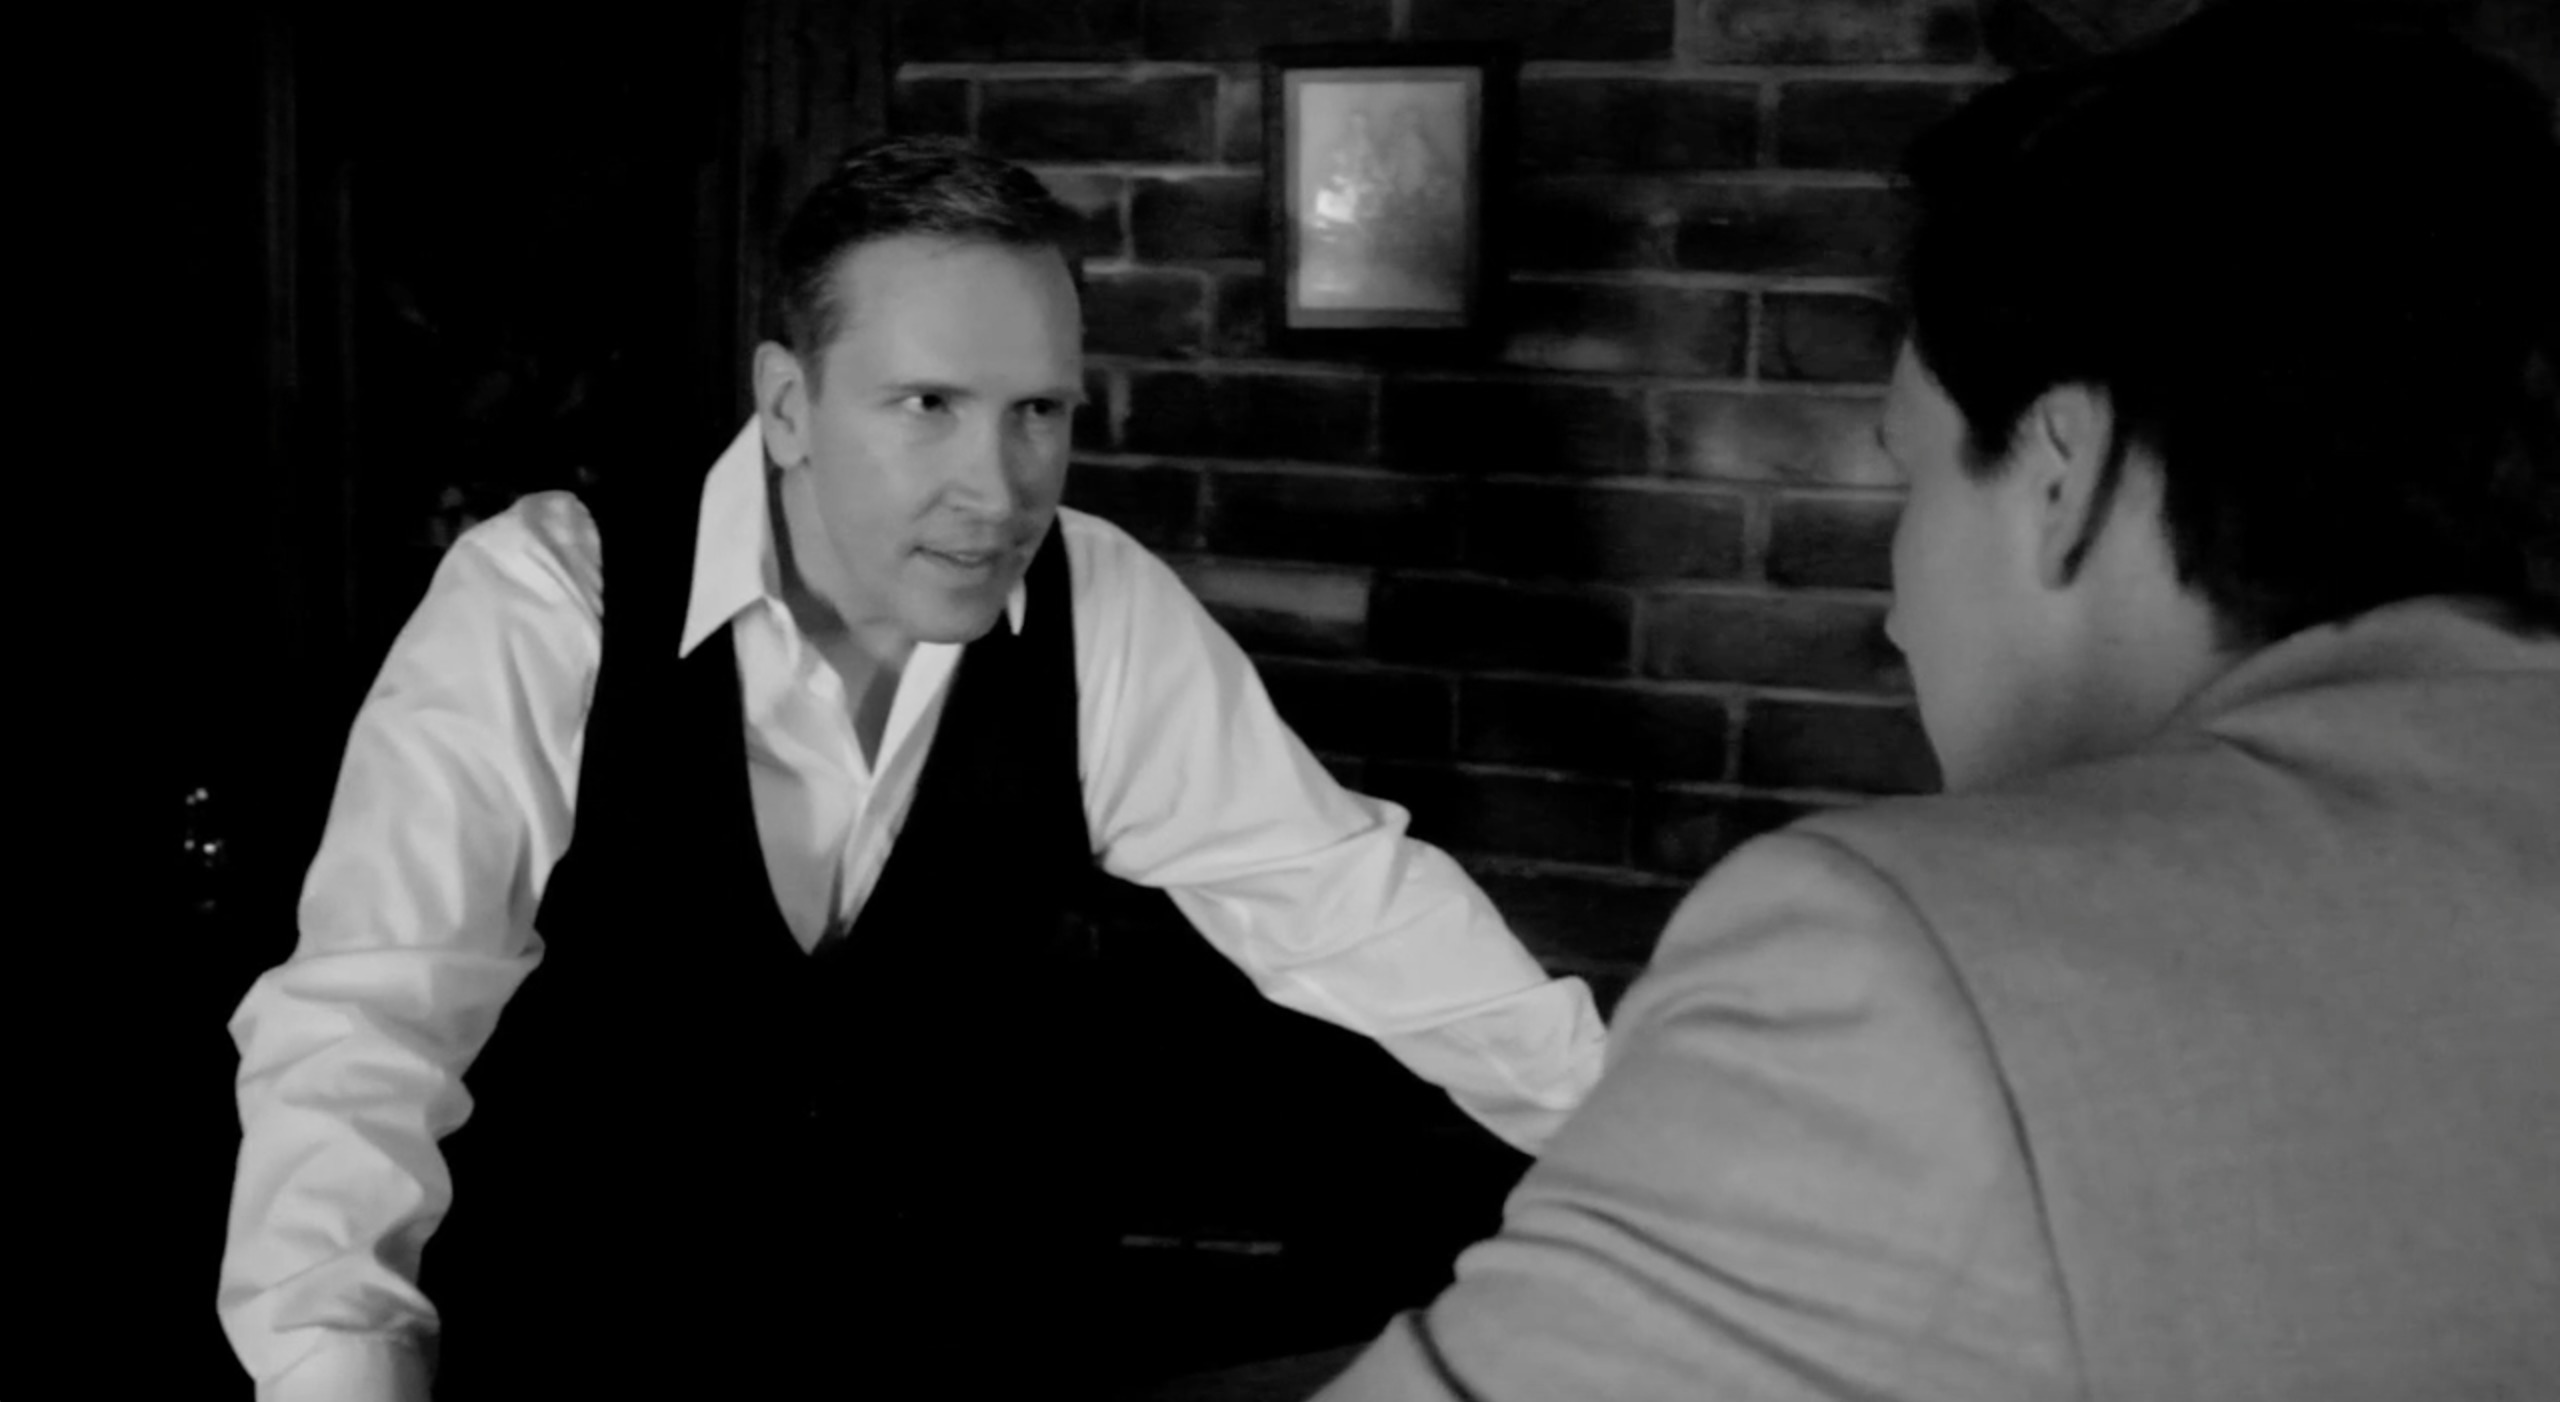 Dwight Turner and Michael Sears Ryan in a scene from Through the Genre (2013)